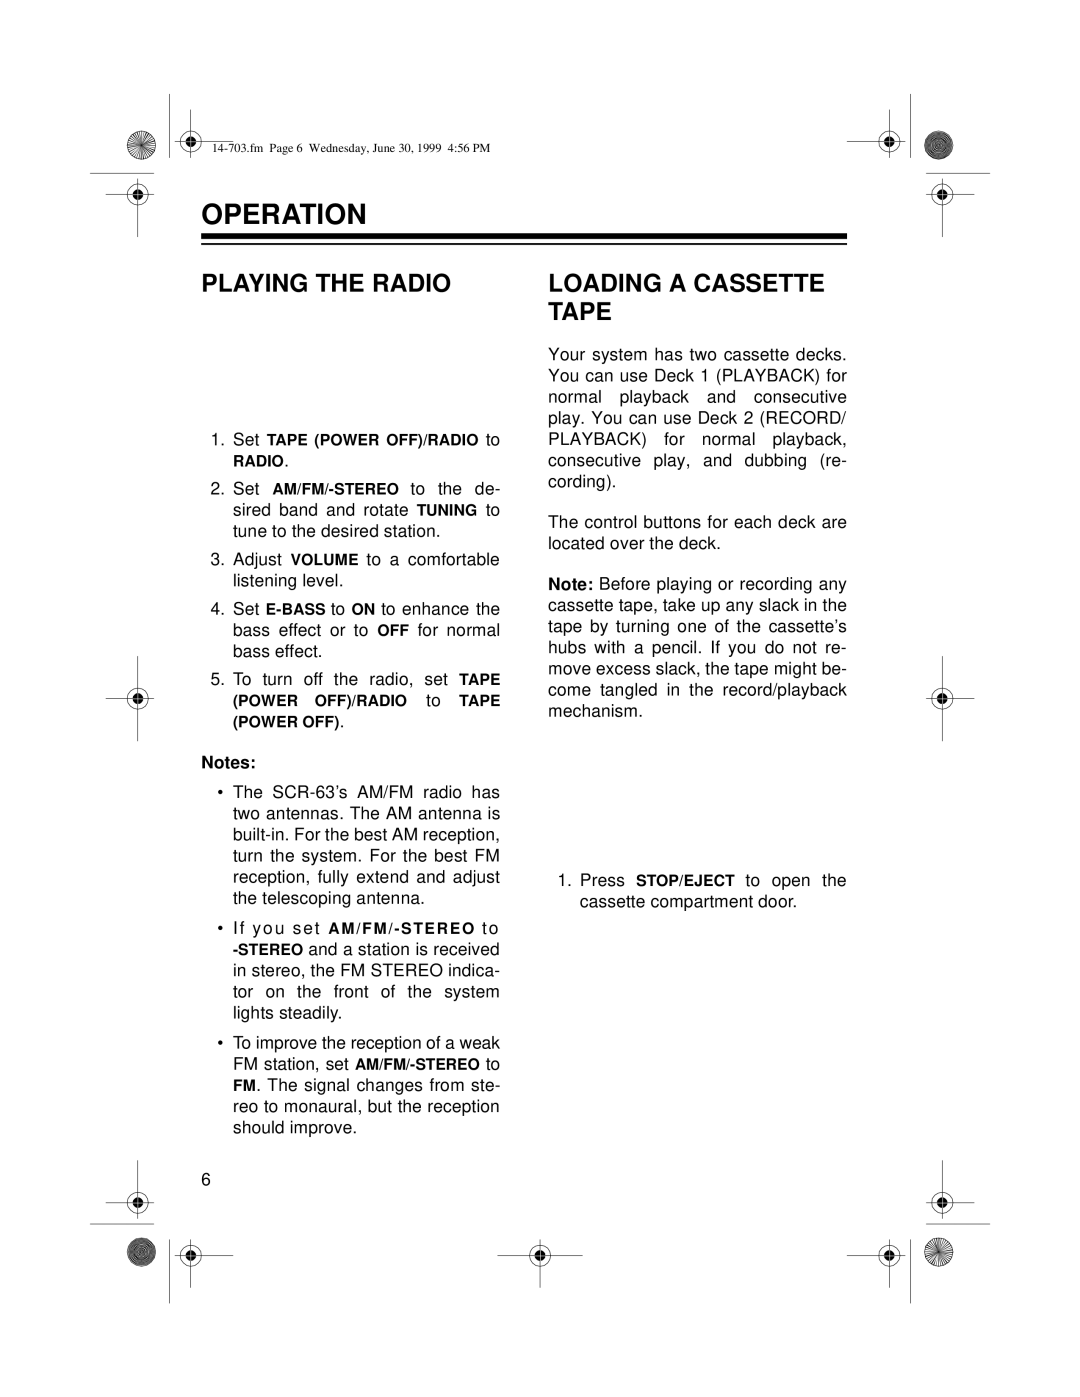 Optimus SCR-63 owner manual Operation, Playing The Radio, Loading A Cassette Tape 